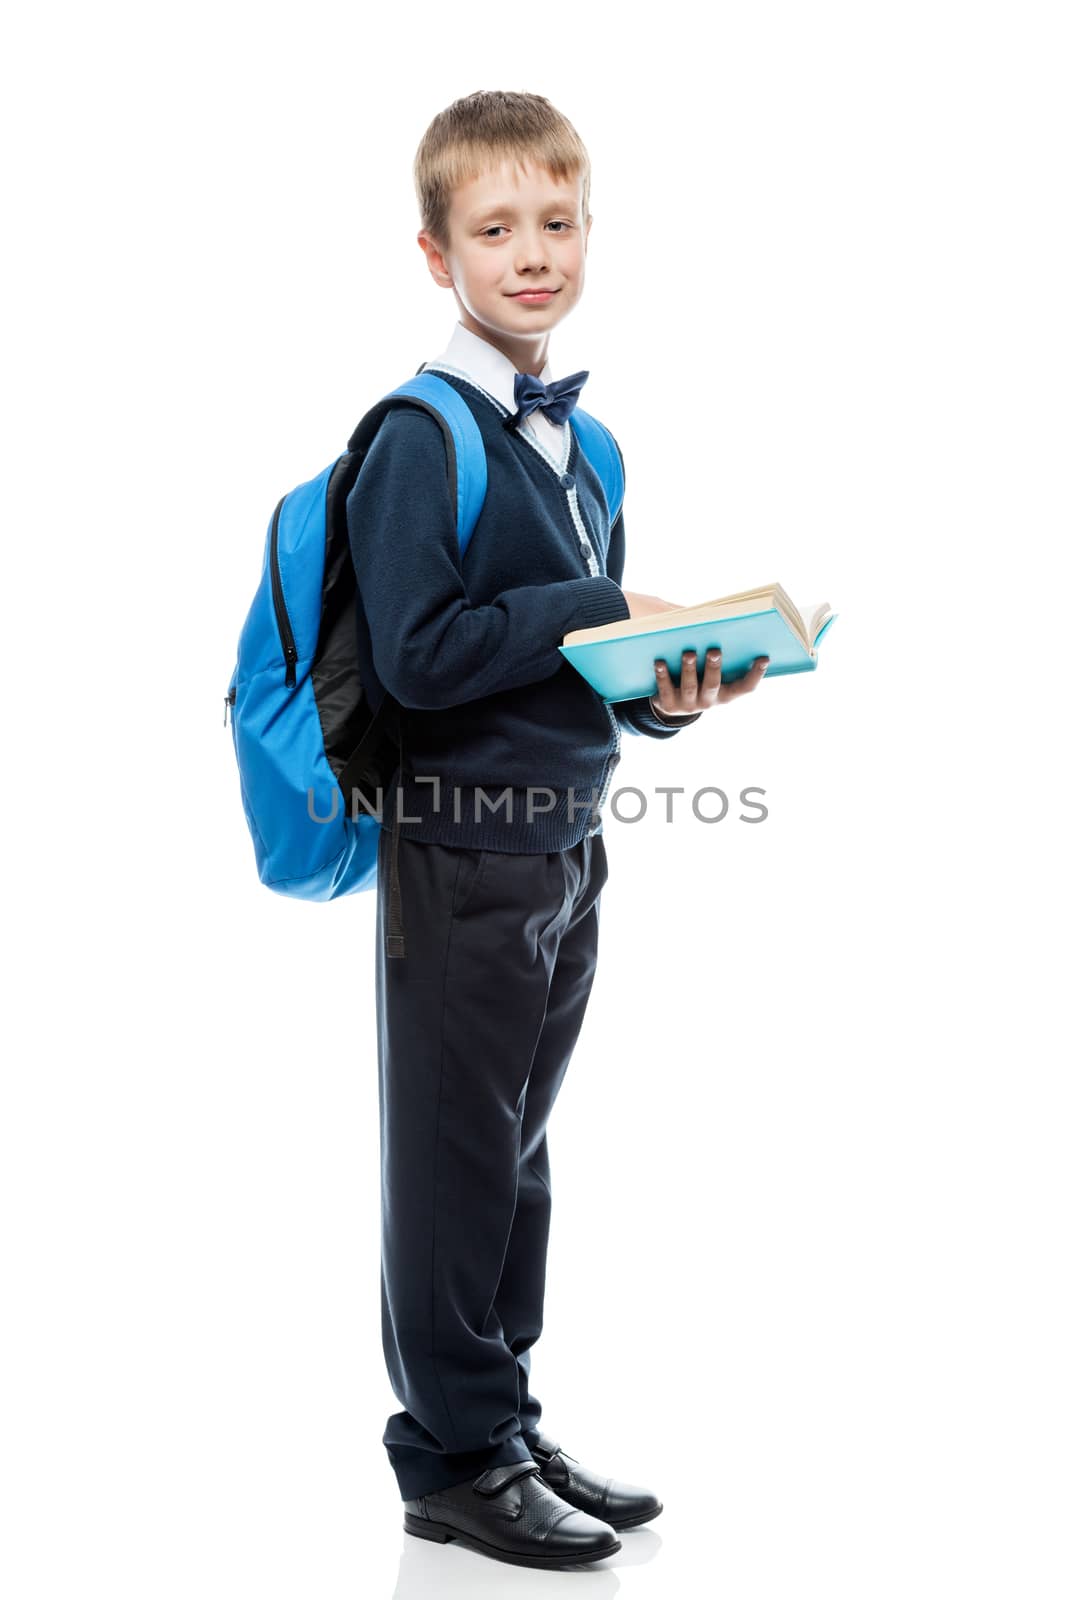 schoolboy with a book and a backpack in the studio on a white background in full length isolated